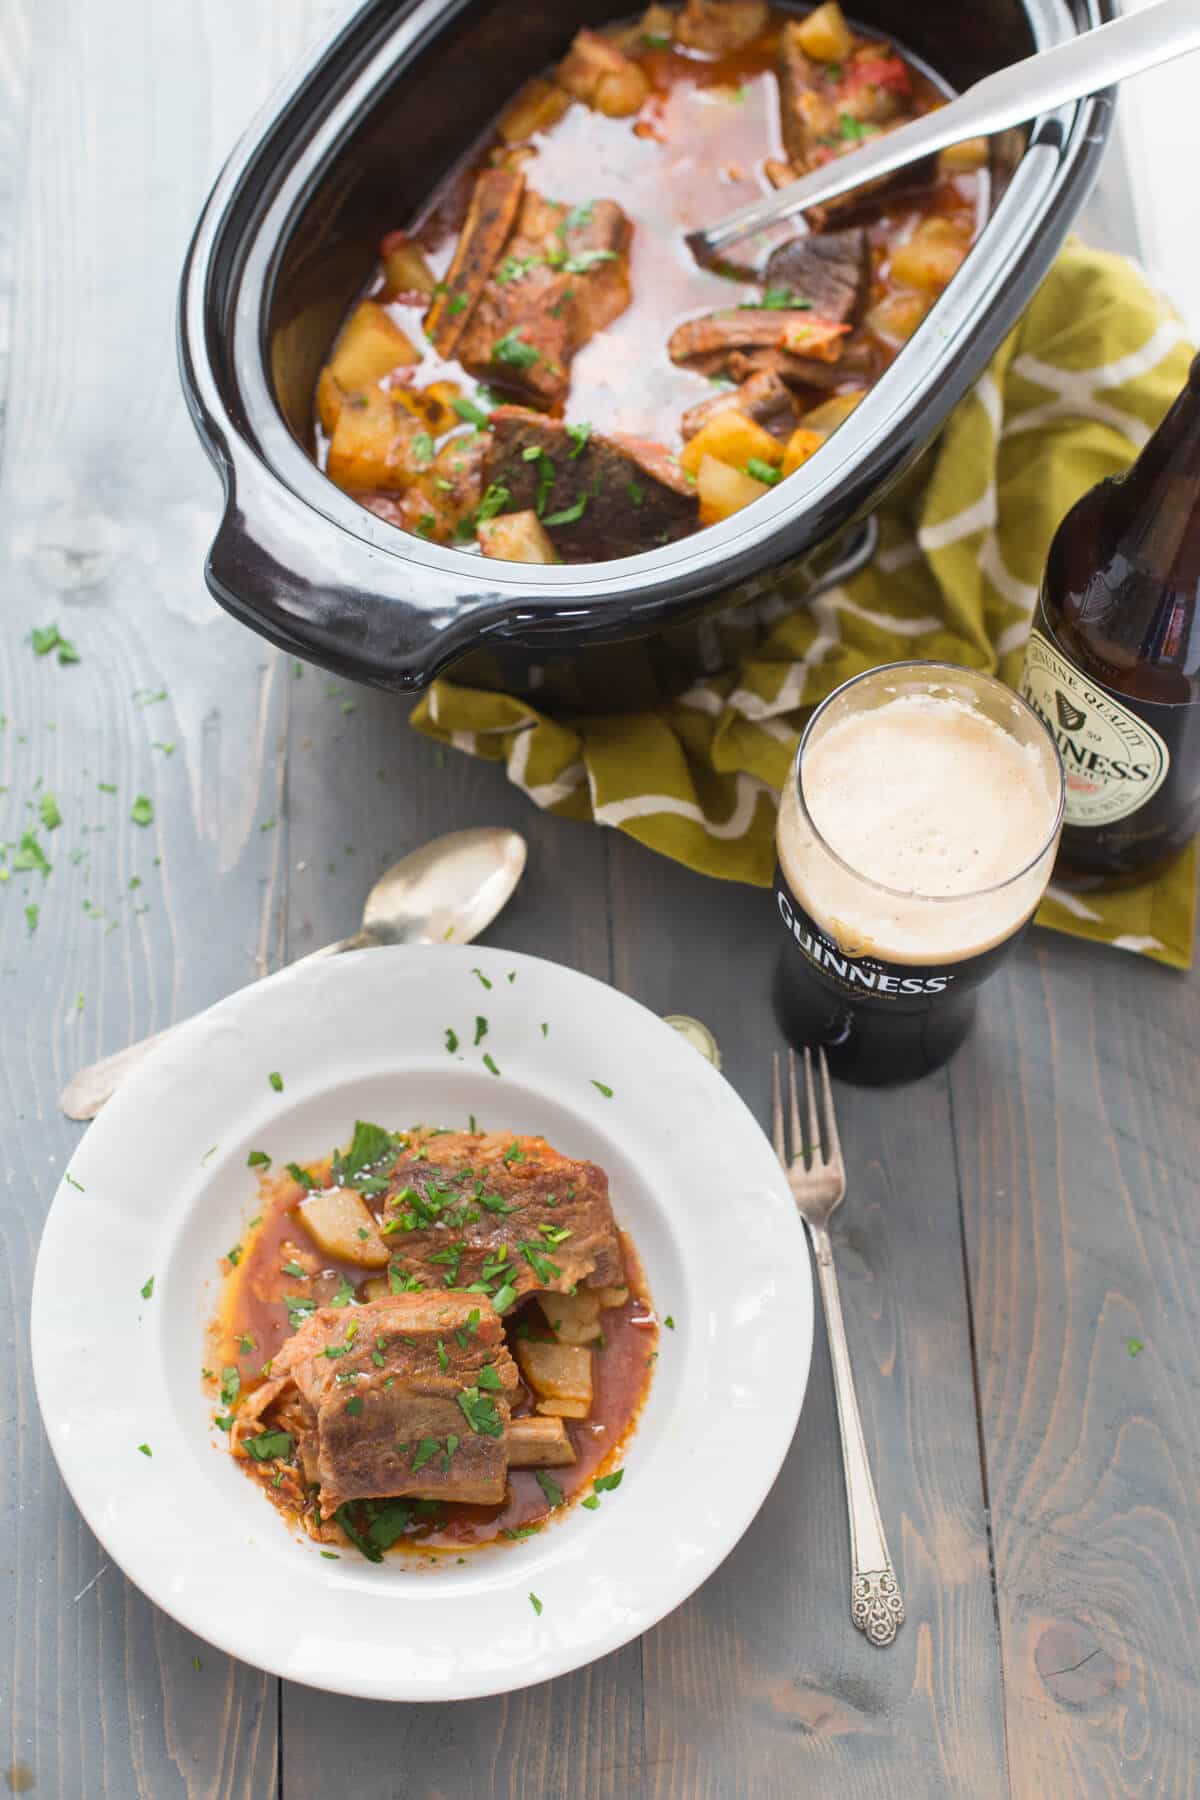 Slow cooker short ribs cook up nice and tender.  The Guinness broth is amazing!